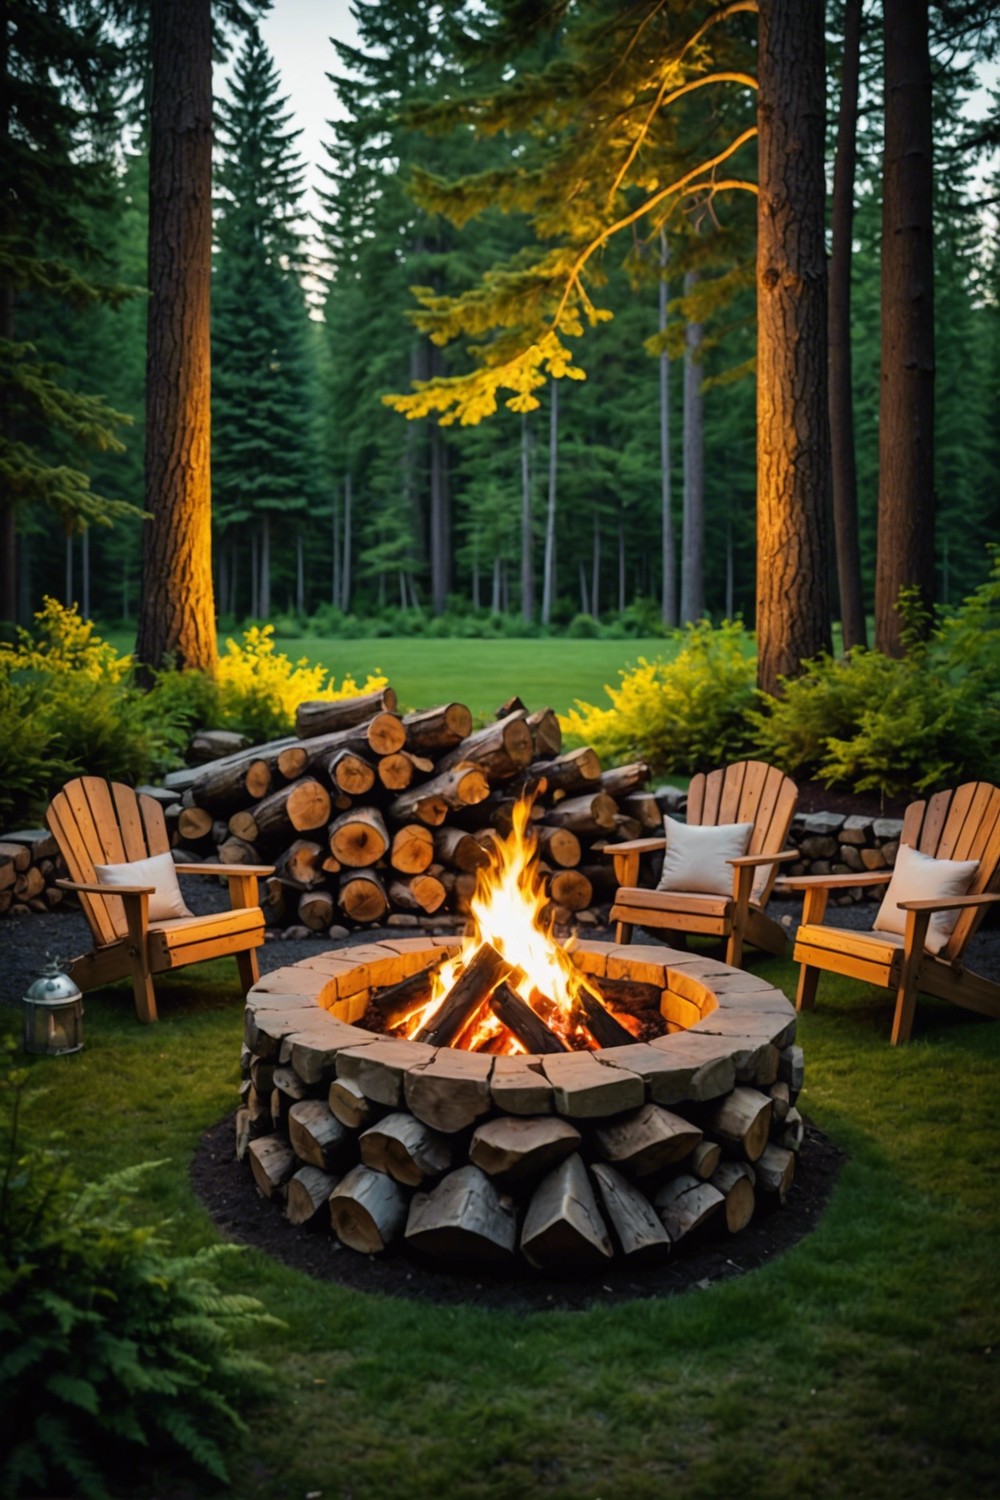 Rustic Fire Pit with Tree Stump Seating